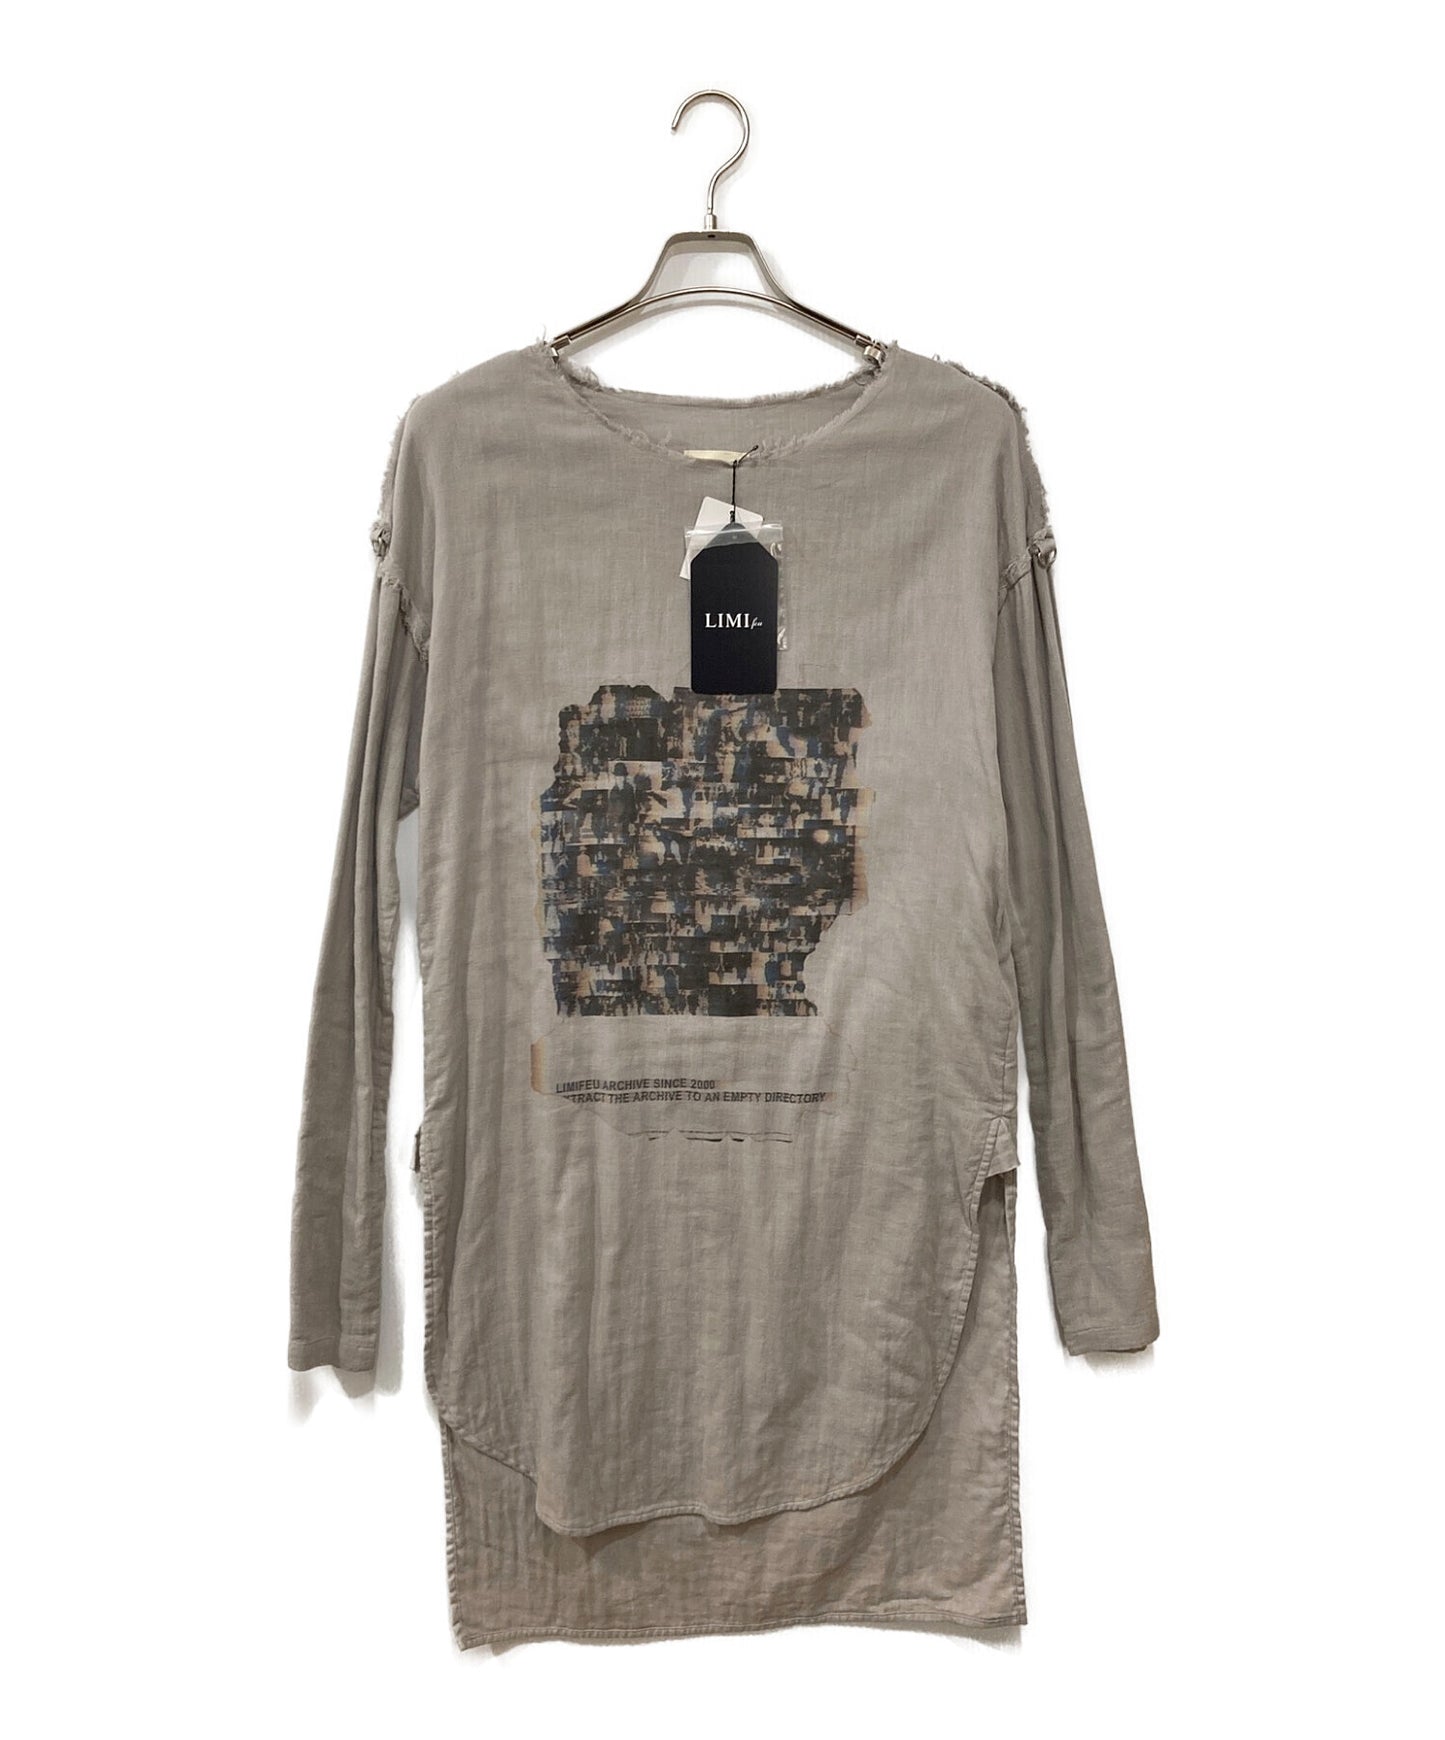 [Pre-owned] LIMI feu Archive Collage Print Long Gauze Shirt